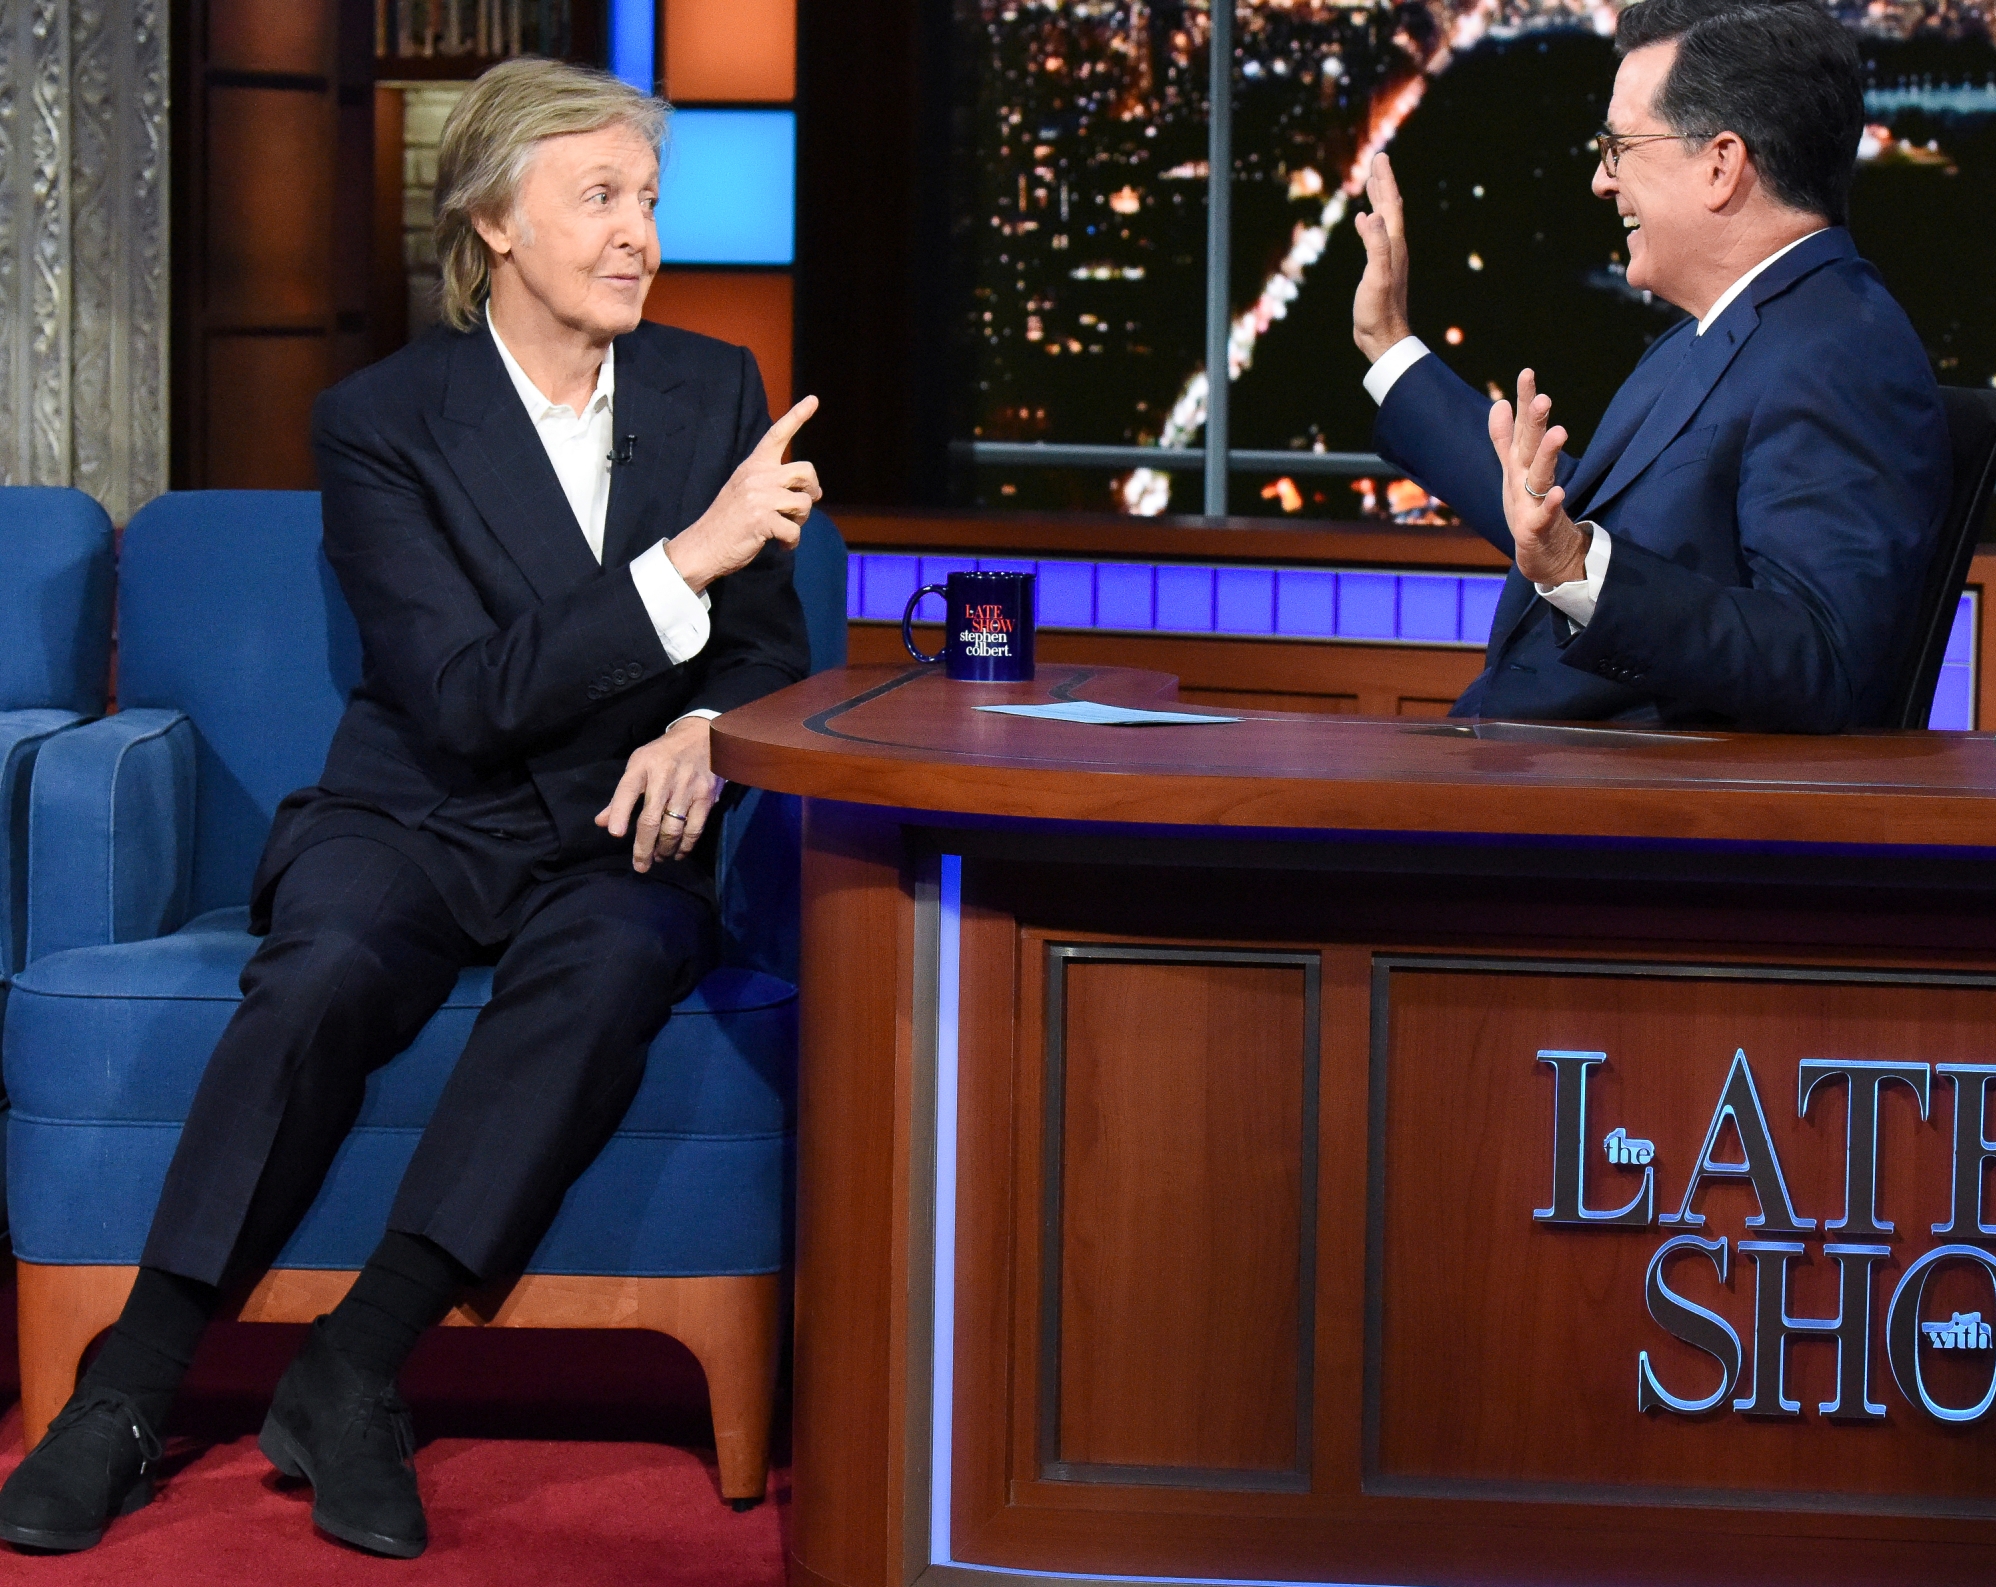 Stephen Colbert Told Paul McCartney Why ‘Band on the Run’ Means So Much to Him